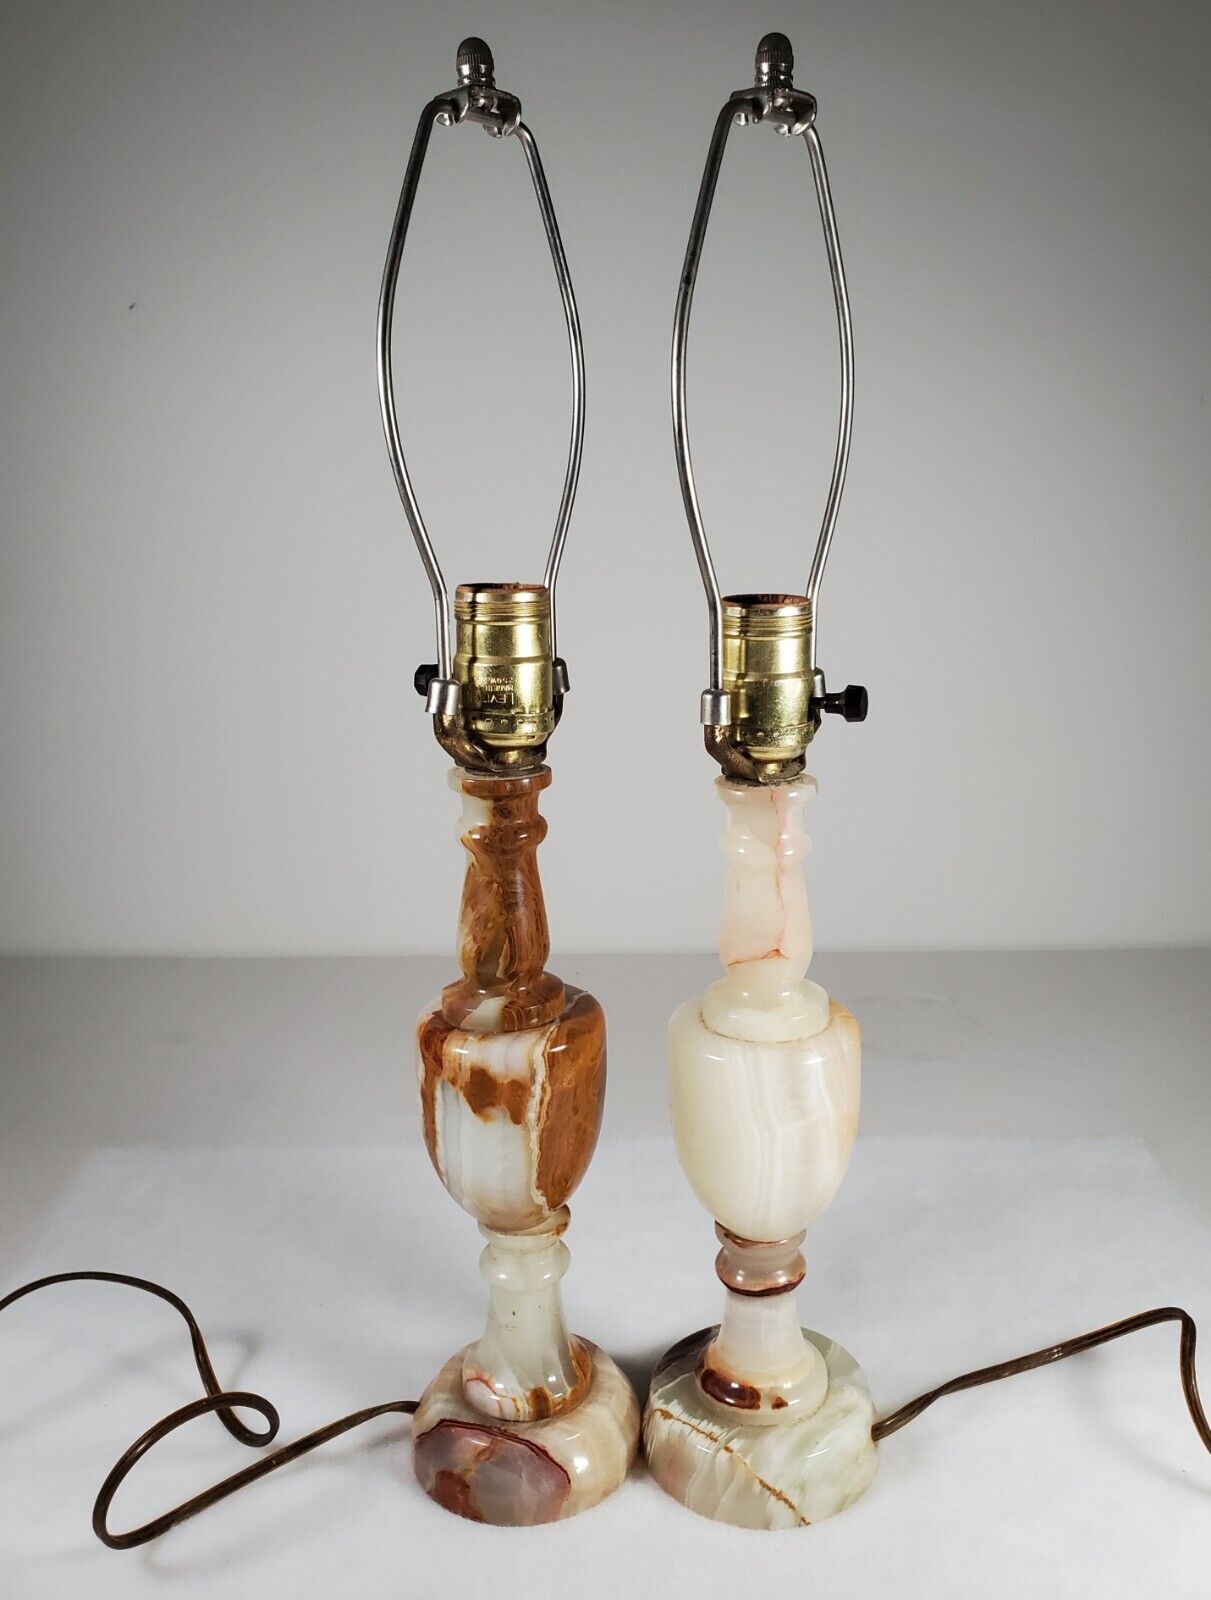 Small Pair Boudoir Lamps All Marble Natural Colors Vintage No Shades Tested Work